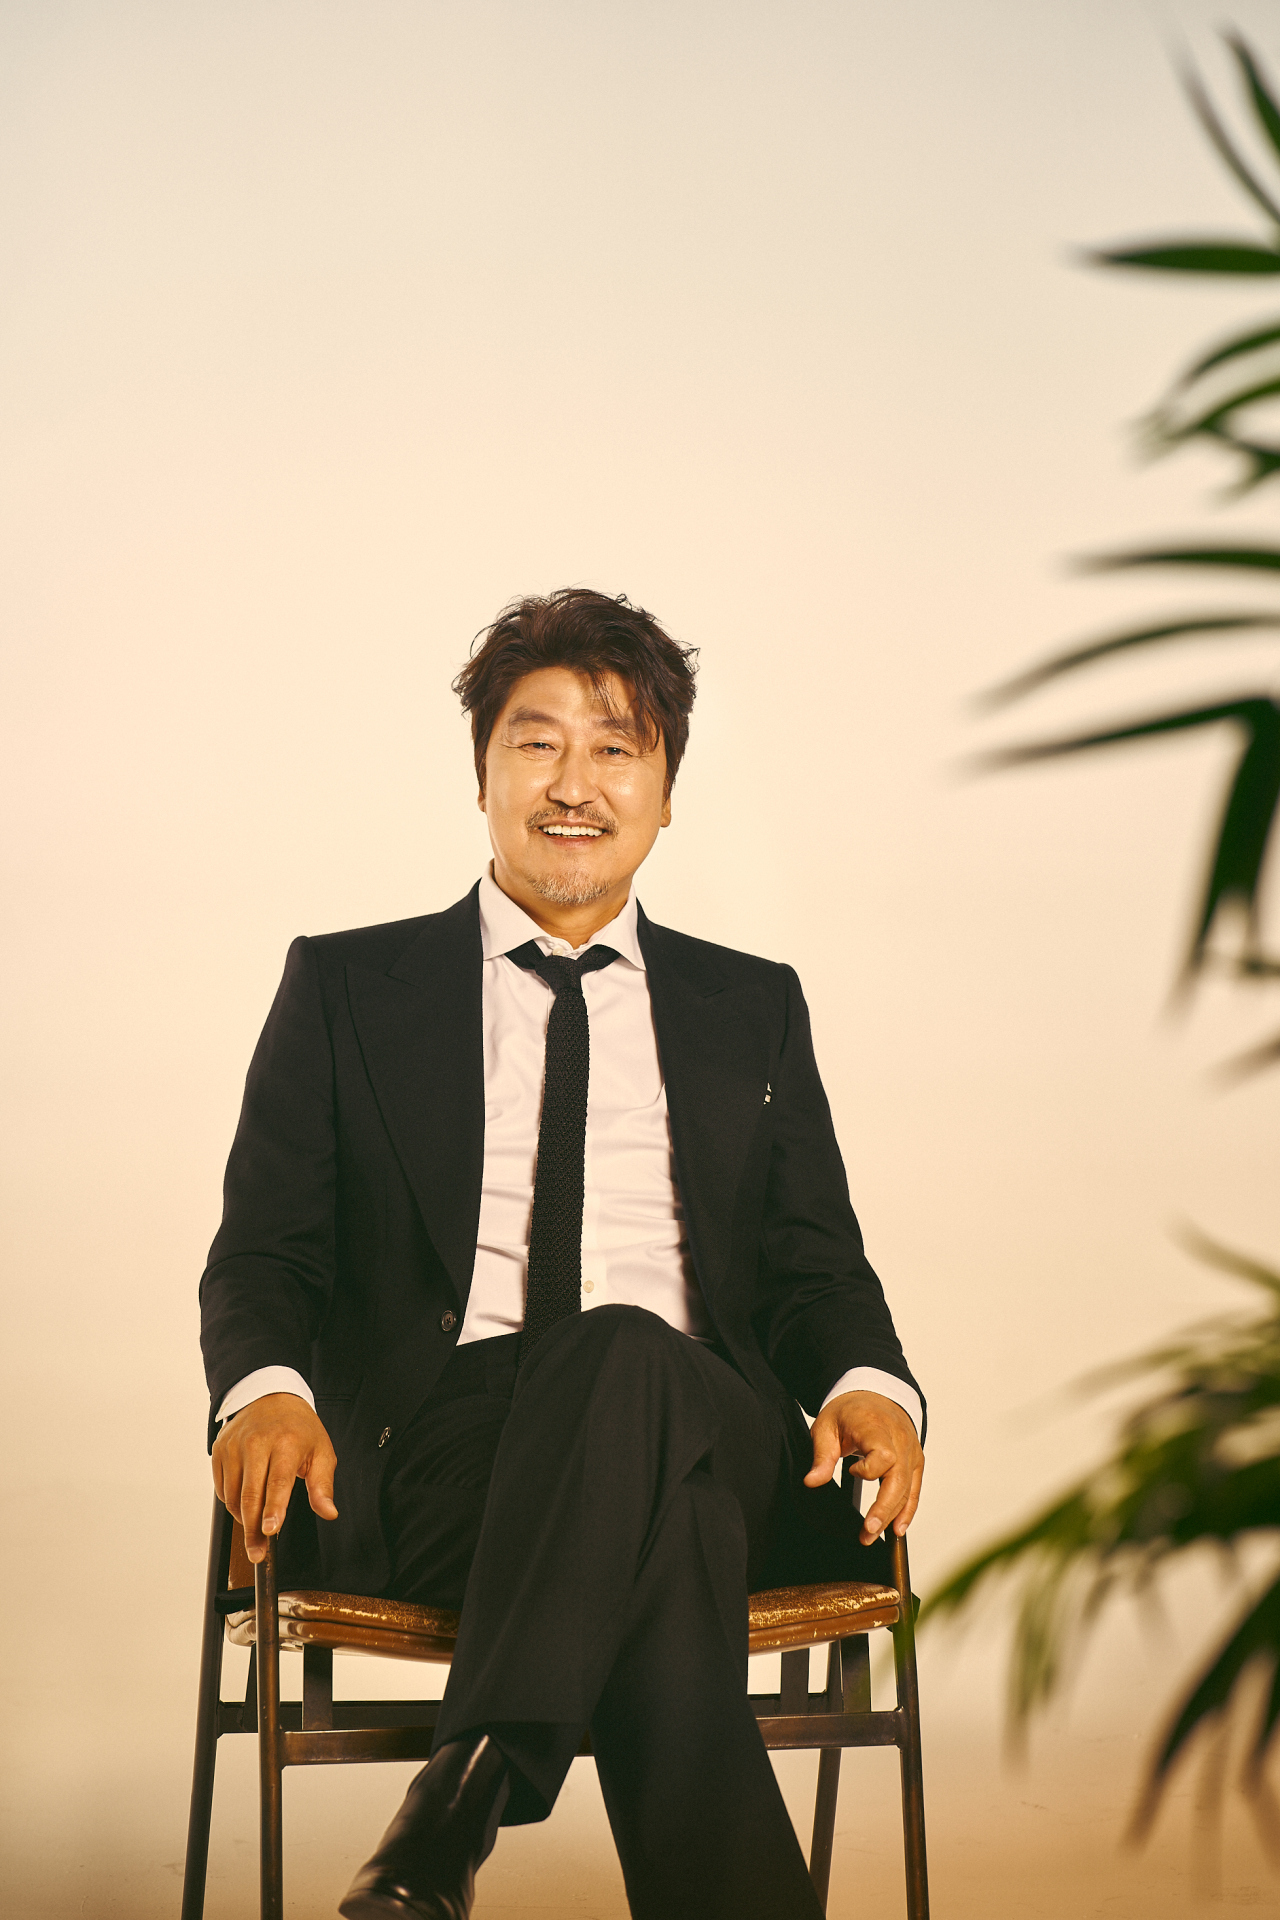 Cannes-winning actor Song Kang-ho (Sublime)